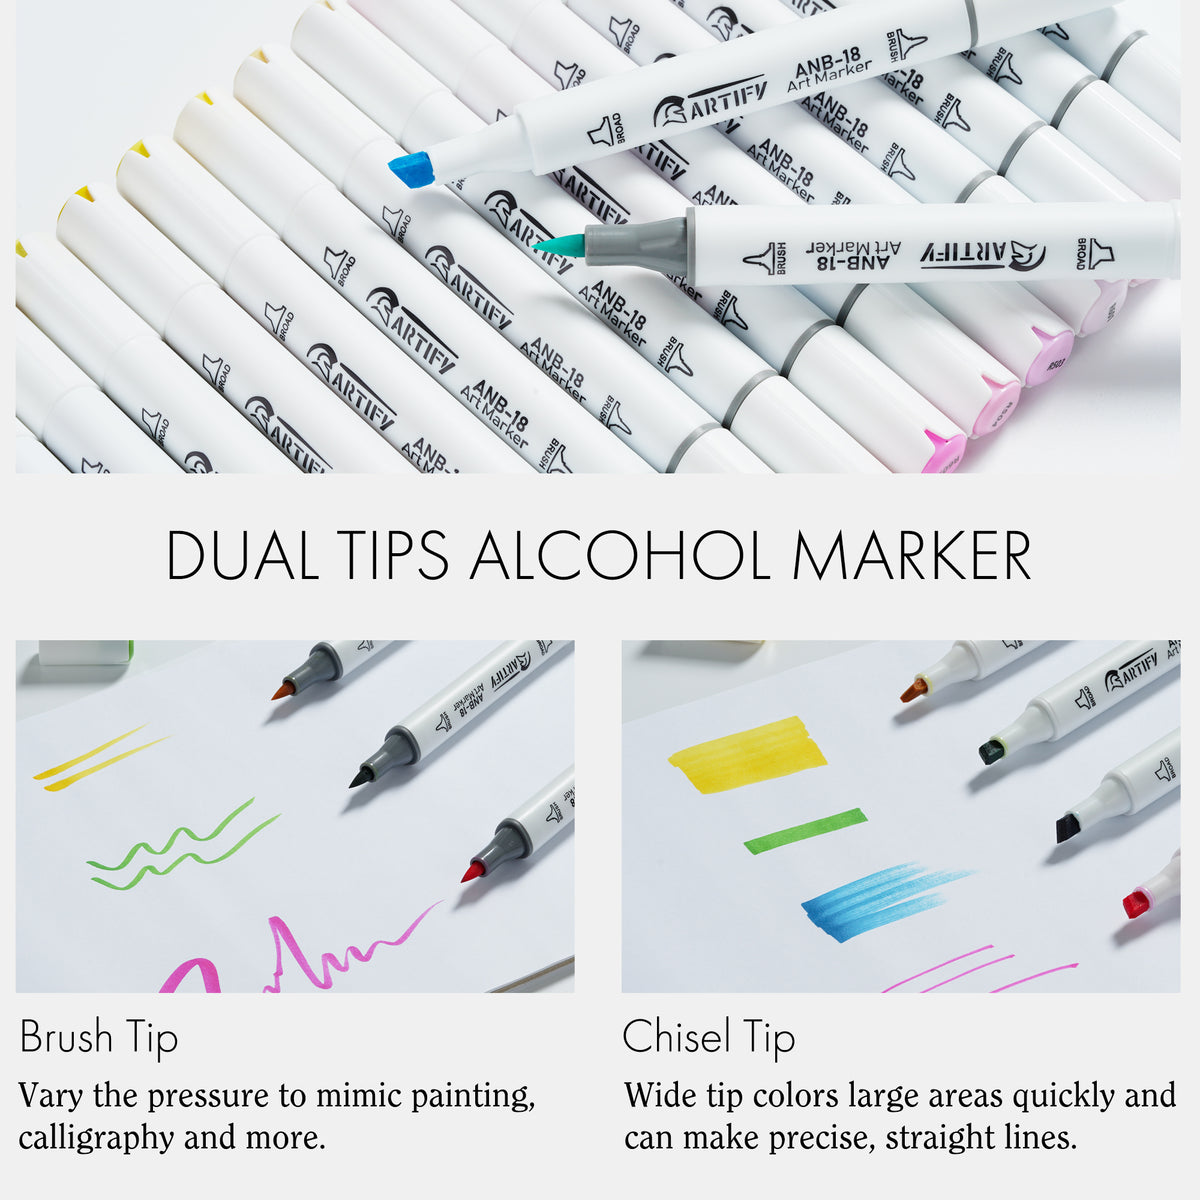 Artify Artist Alcohol Based Art Marker Set with Plastic Carrying